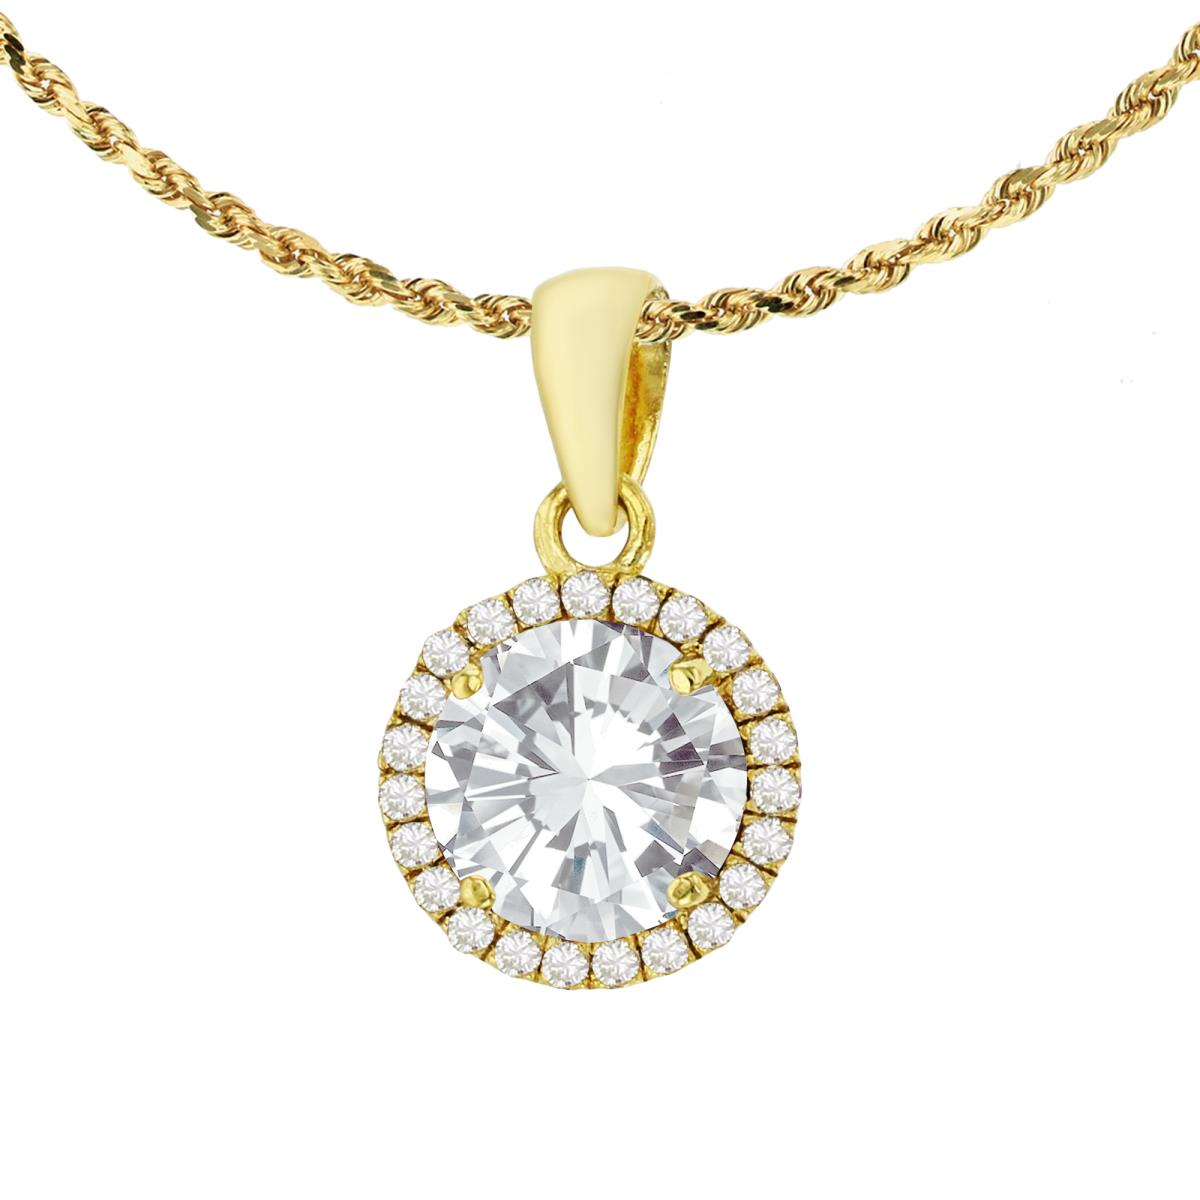 10K Yellow Gold 7mm Round White Topaz & 0.12 CTTW Diamond Halo 18" Rope Chain Necklace